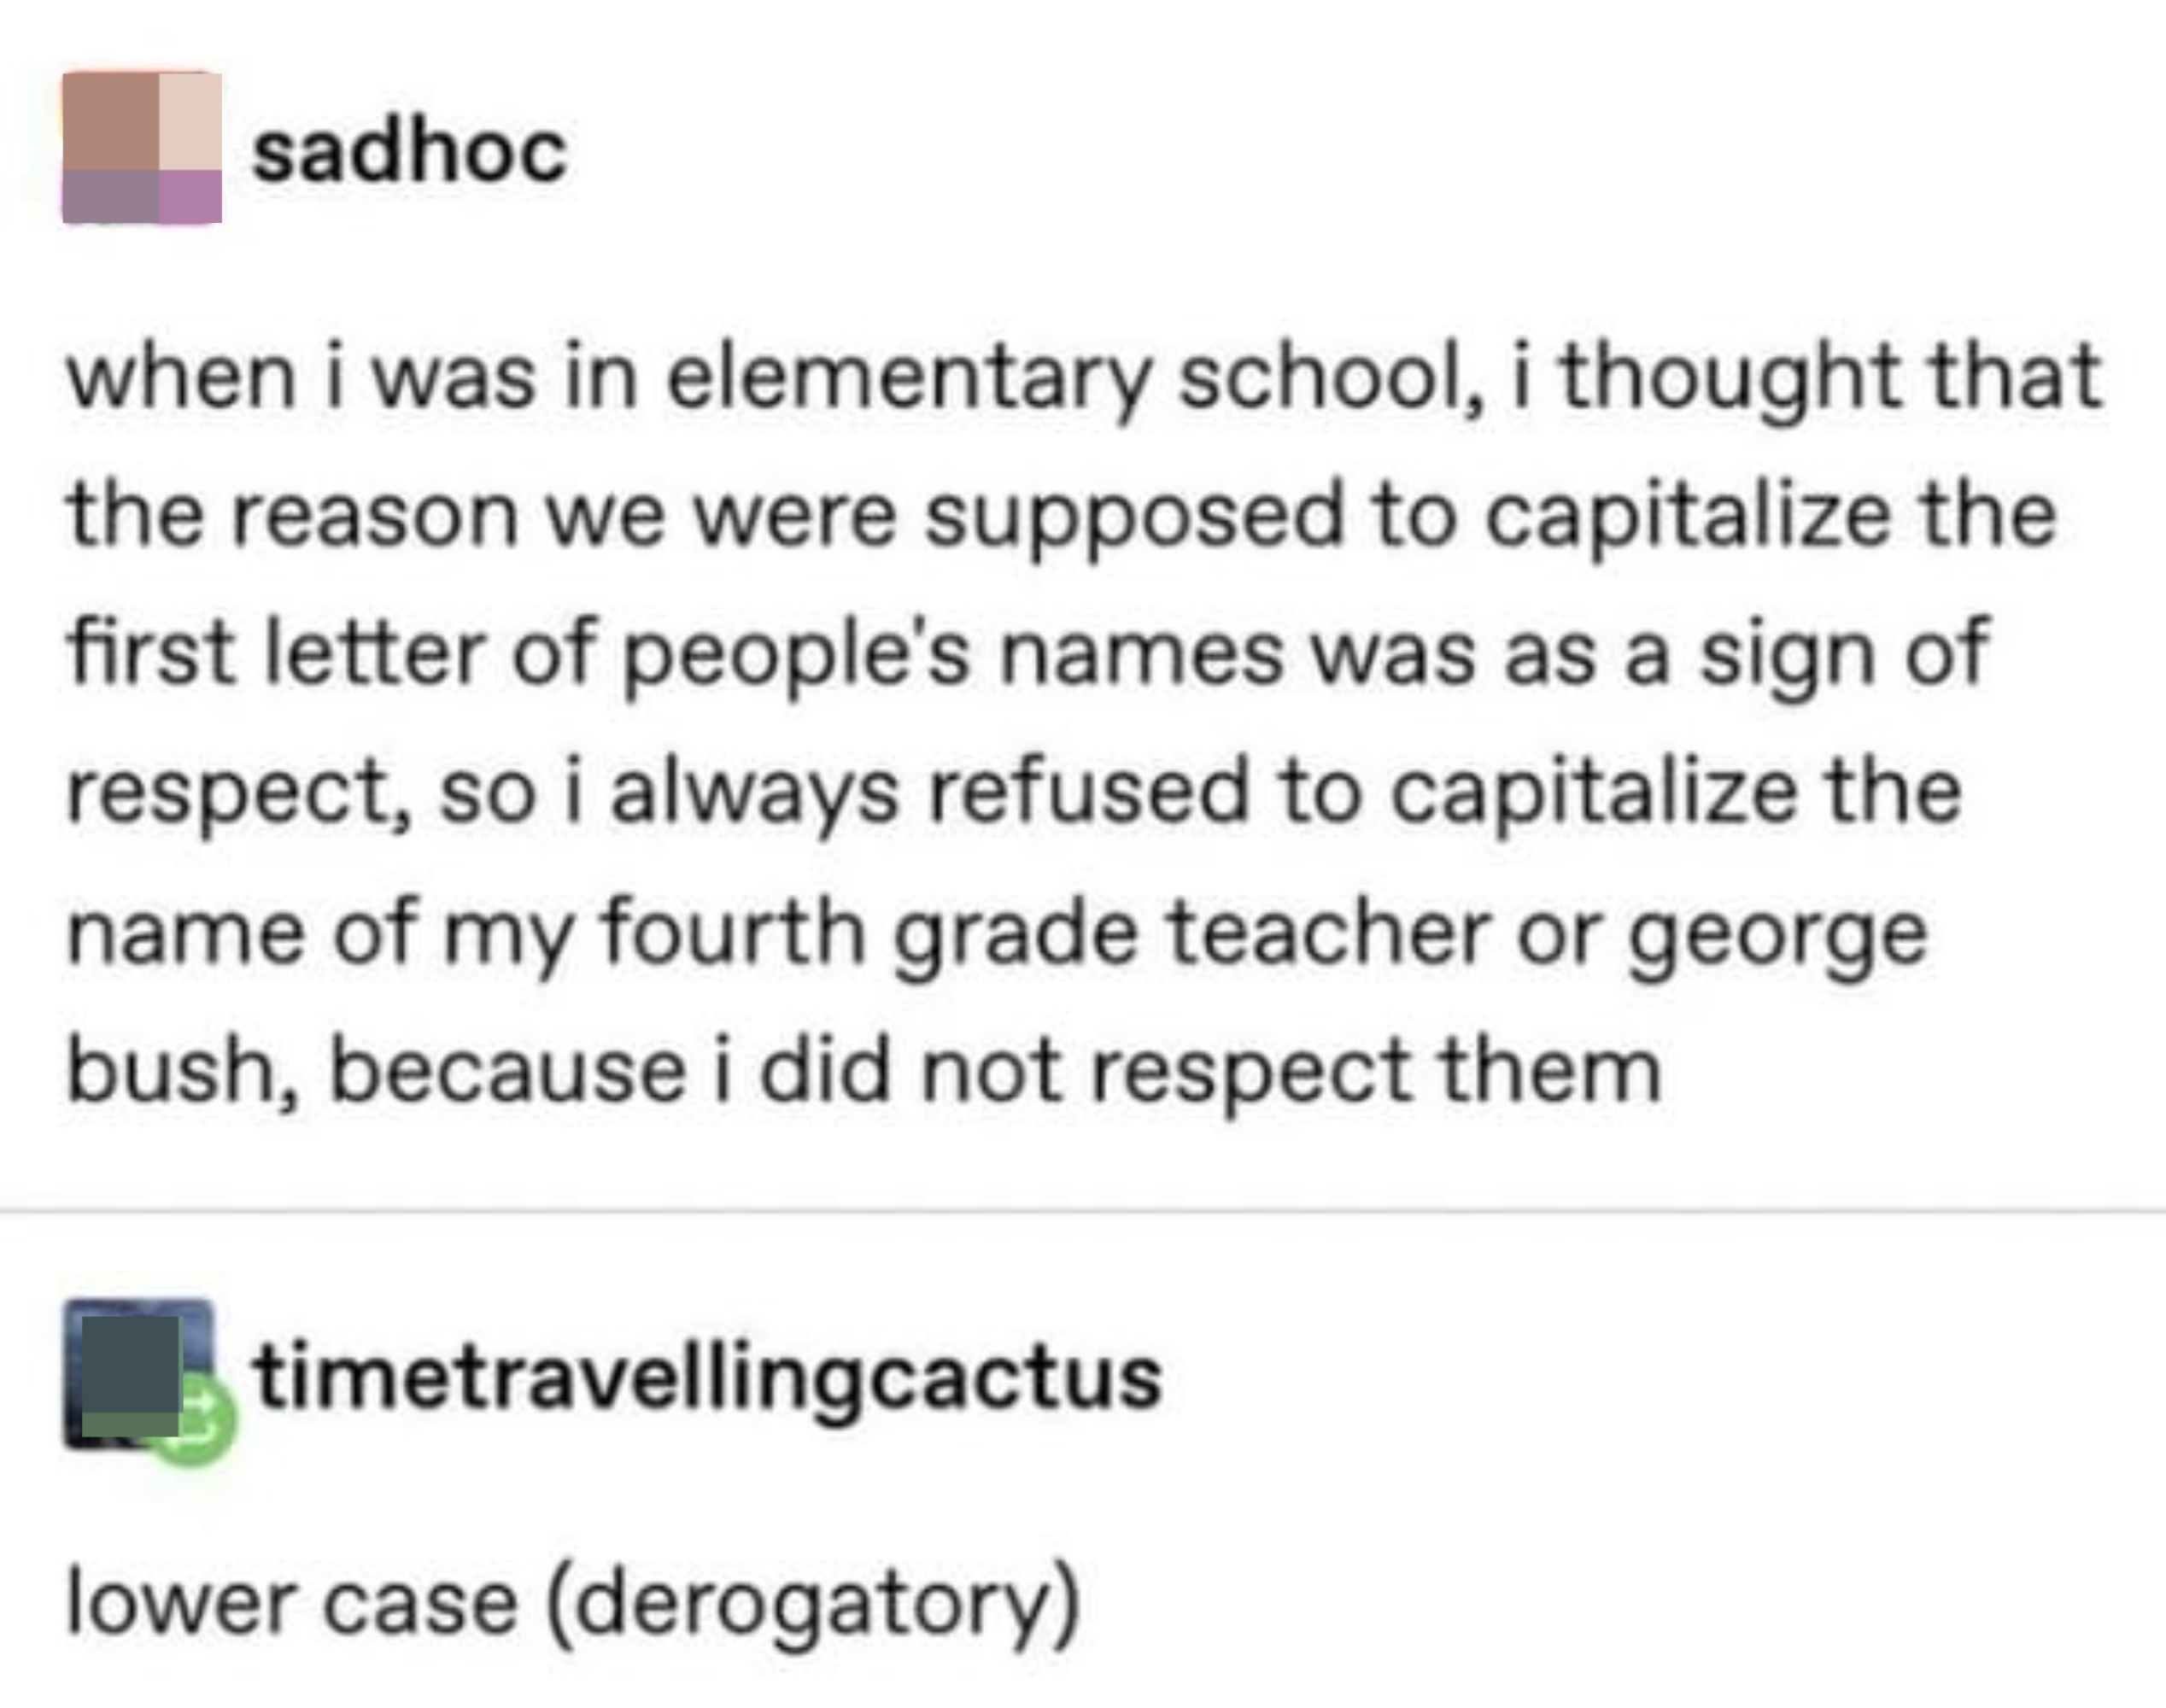 &quot;in elementary school, i thought the reason to capitalize the first letter of people&#x27;s names was as a sign of respect, so i refused to capitalize the name of my fourth grade teacher or george bush because i did not respect them&quot; &quot;lower case (derogatory)&quot;